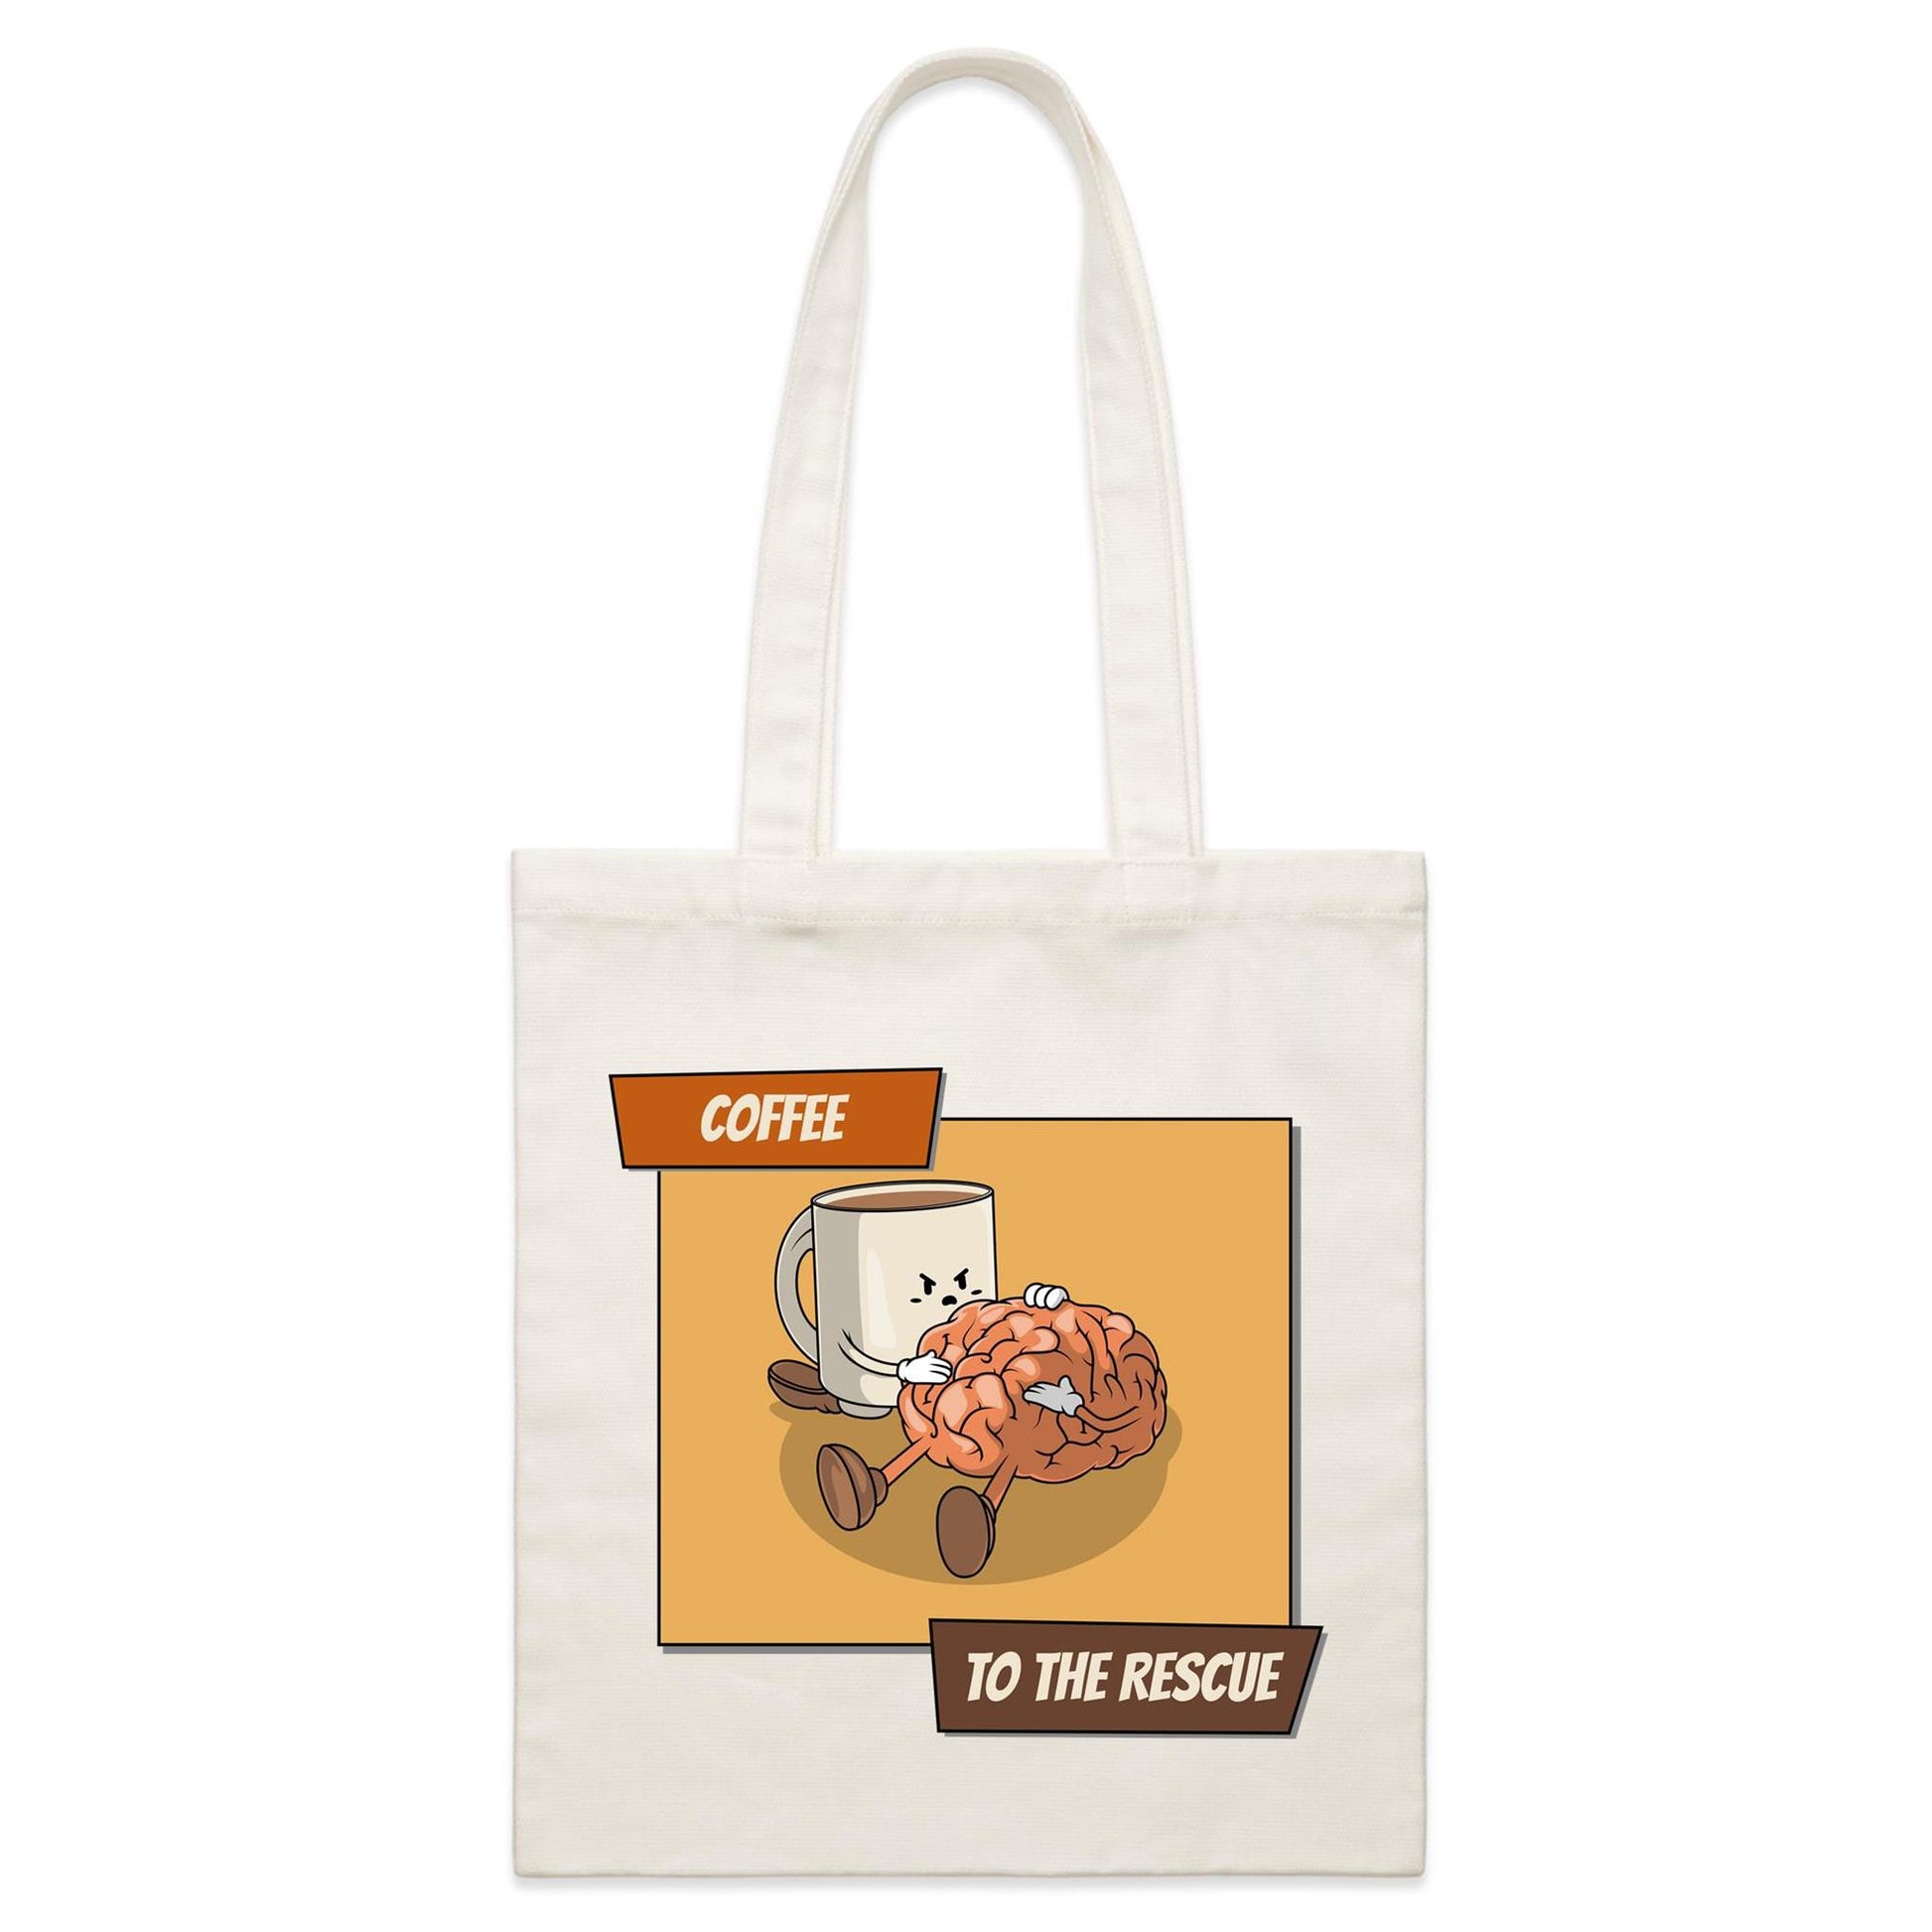 Coffee To The Rescue - Parcel Canvas Tote Bag Default Title Parcel Tote Bag Coffee